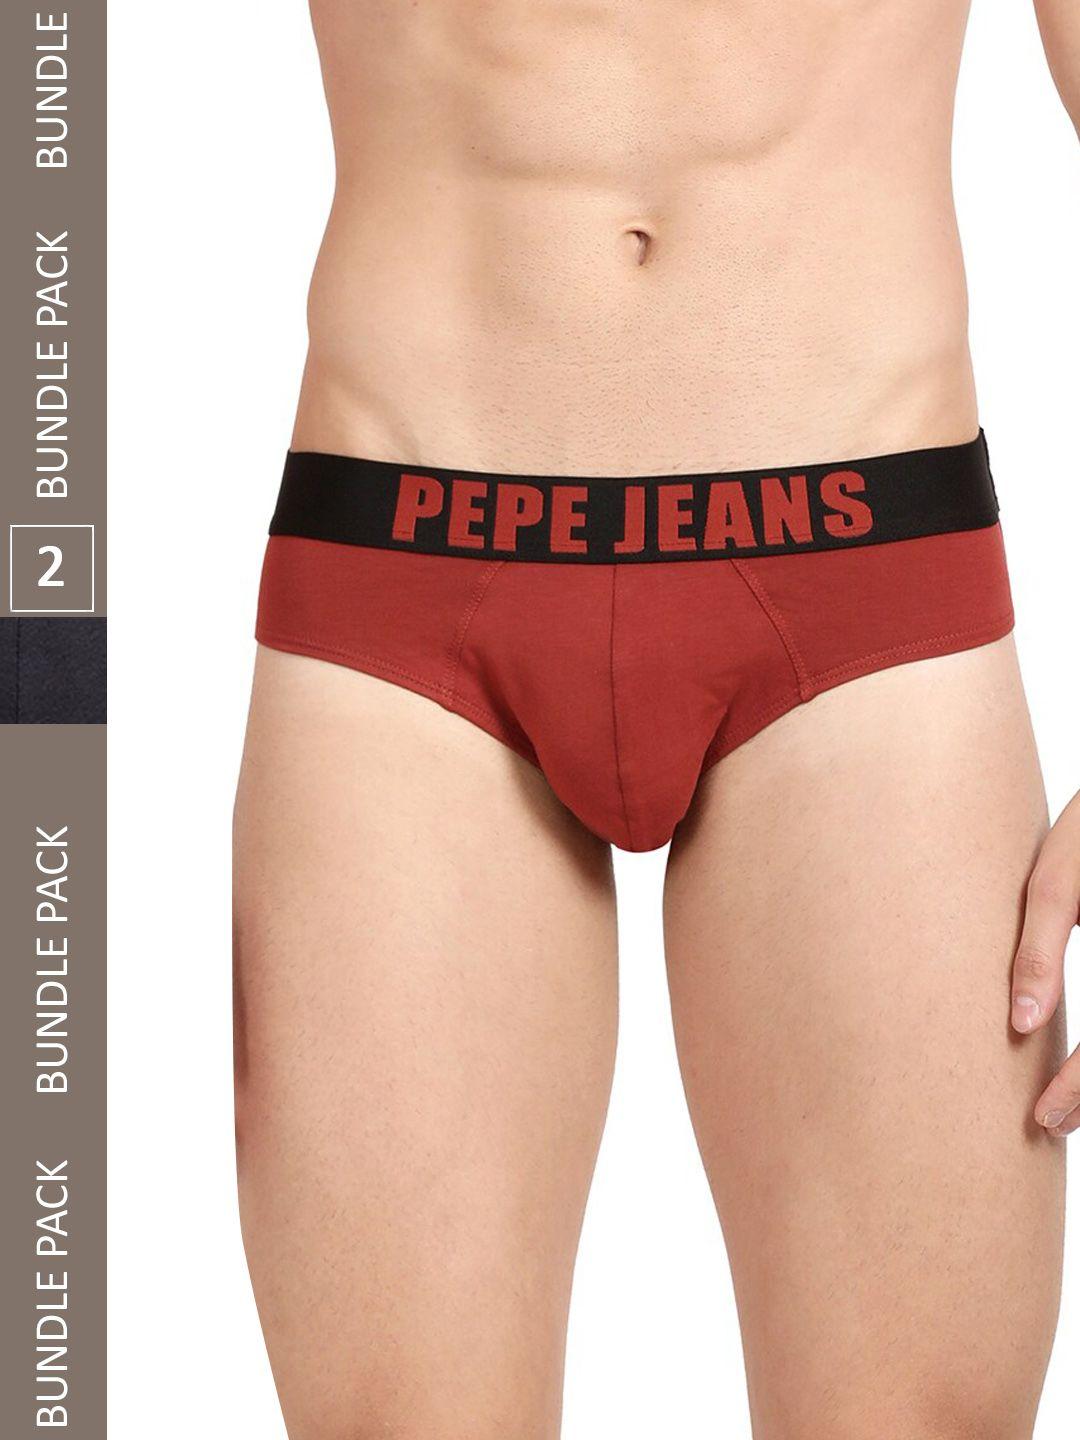 pepe-jeans-men-pack-of-2-cotton-basic-briefs